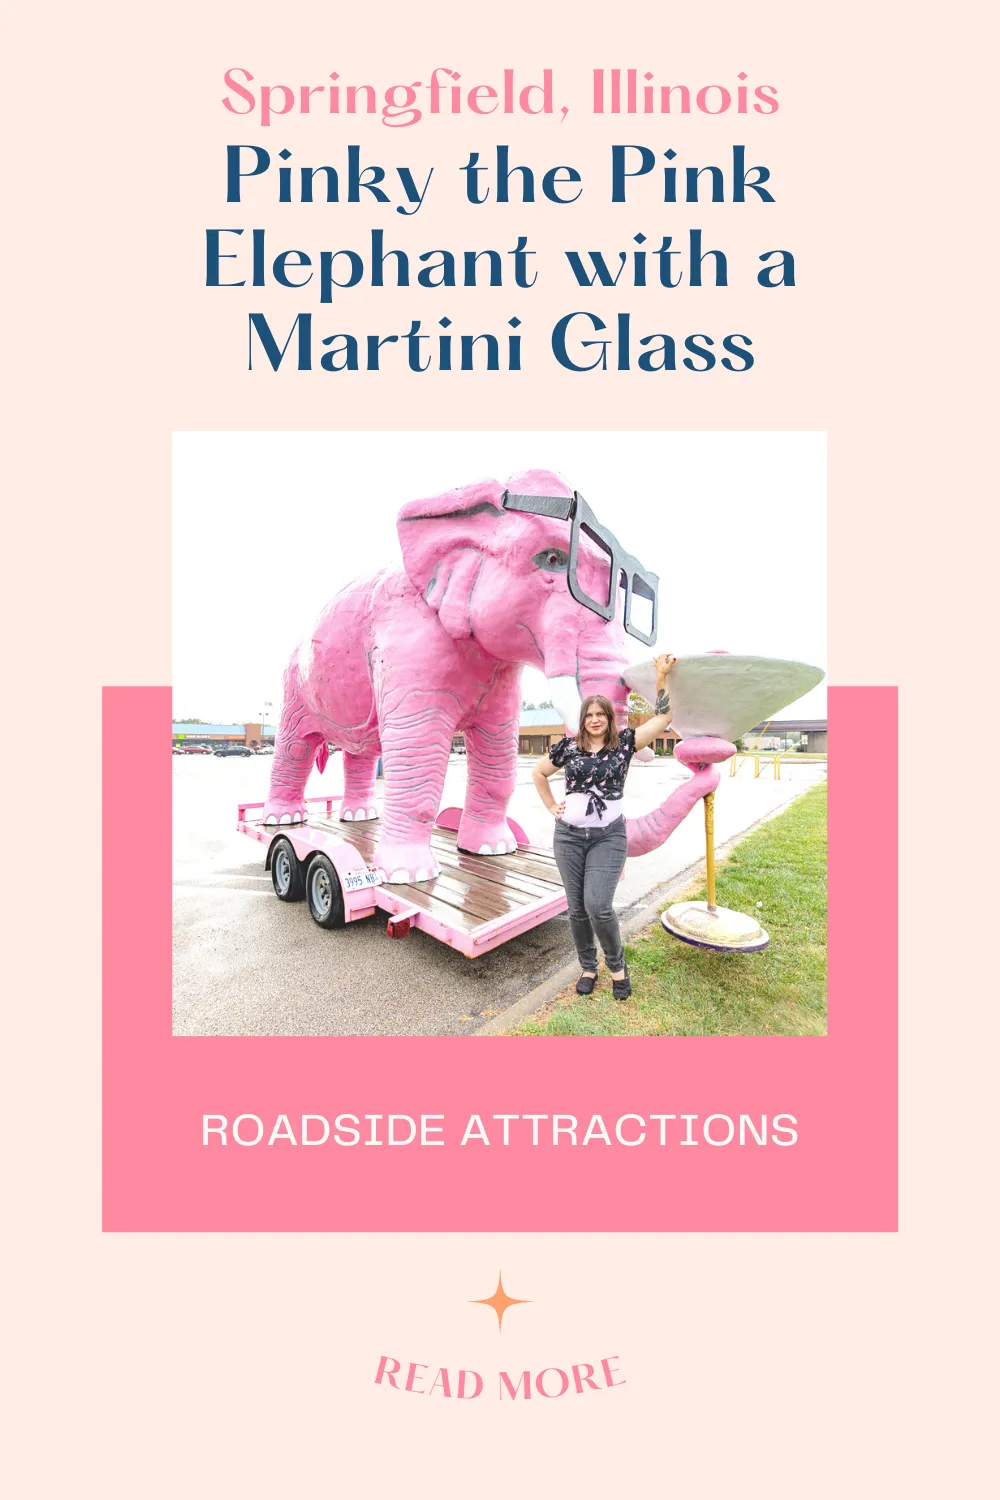 If you're seeing pink elephants on a road trip, you should probably pull your car over.  Particularly if you see this pink elephant ahead: Pinky, the Pink Elephant with a Martini Glass and Glasses in Springfield, Illinois. Because you don't want to miss this fun Illinois roadside attraction!  #RoadTrips #RoadTripStop #Route66 #Route66RoadTrip #IllinoisRoute66 #Illinois #IllinoisRoadTrip #IllinoisRoadsideAttractions #RoadsideAttractions #RoadsideAttraction #RoadsideAmerica #RoadTrip